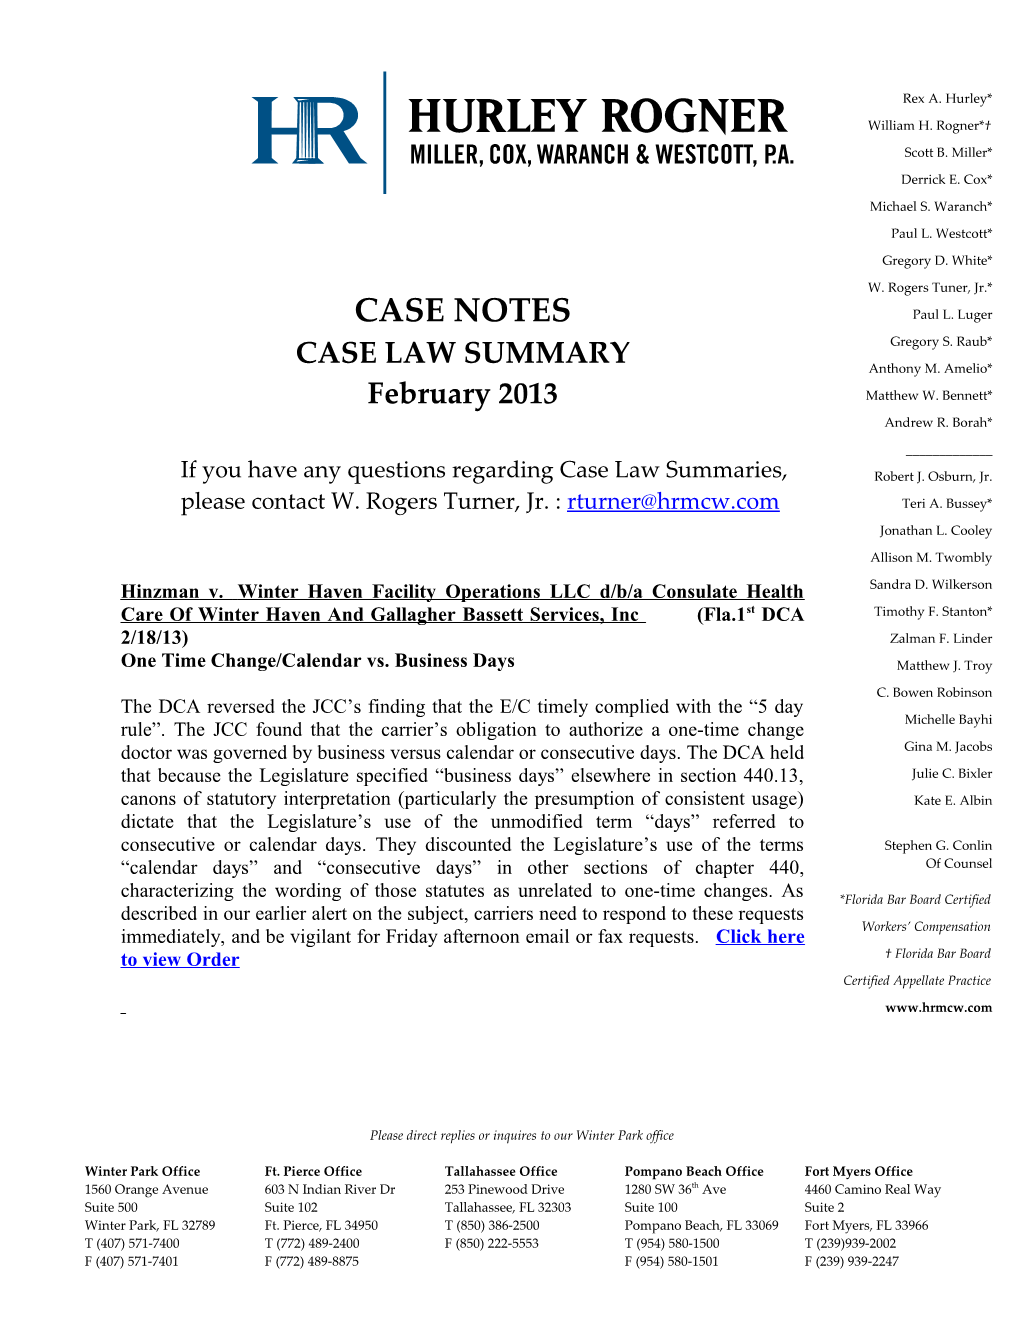 If You Have Any Questions Regarding Case Law Summaries